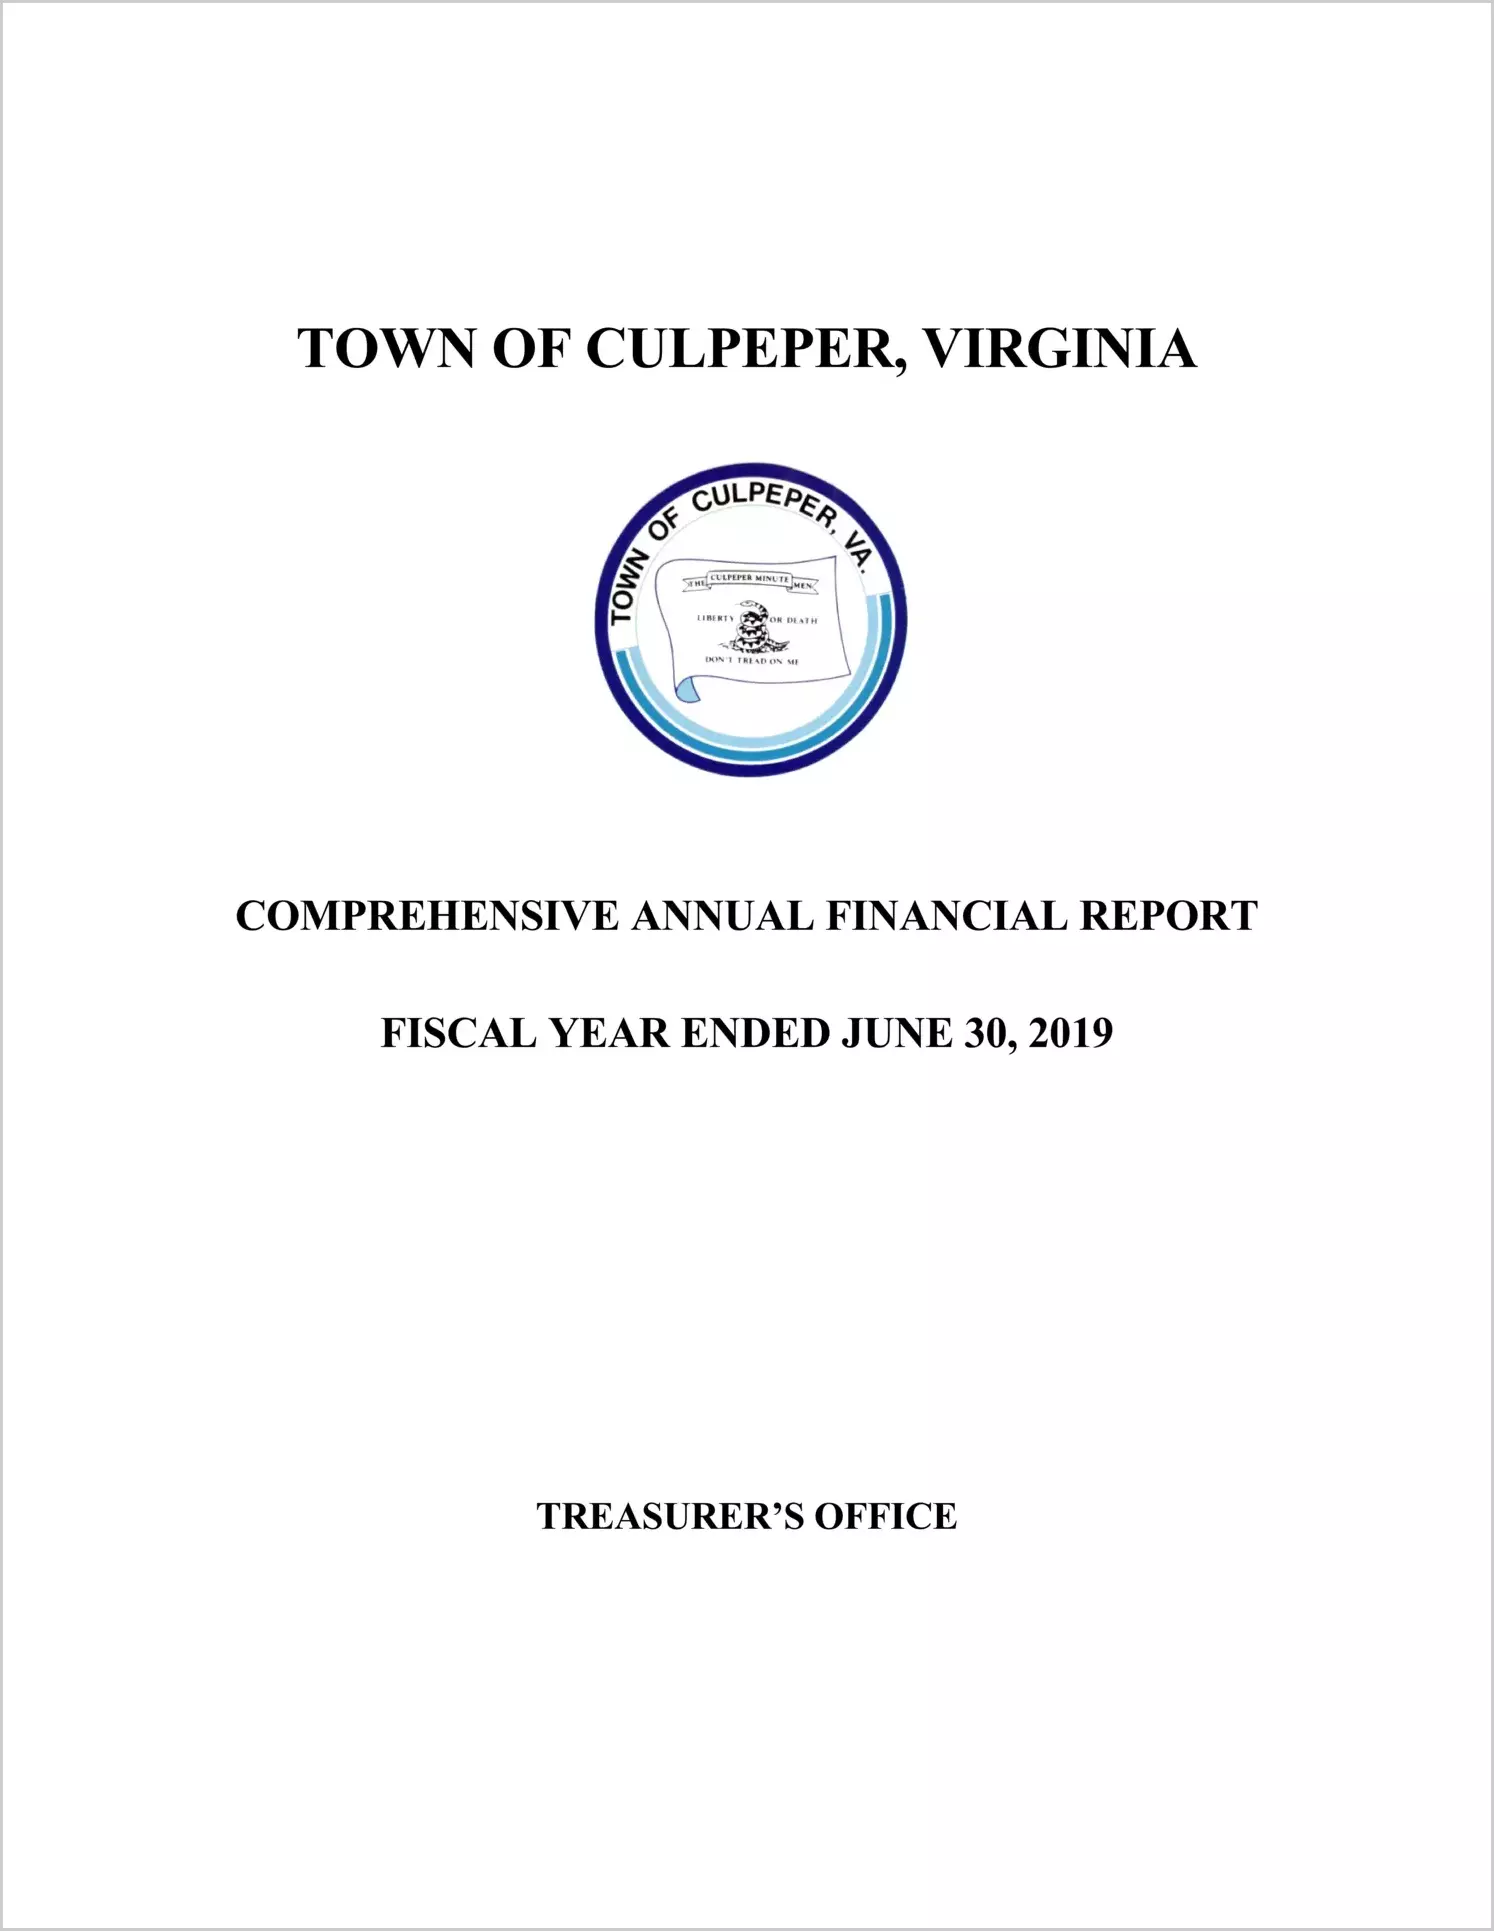 2019 Annual Financial Report for Town of Culpeper